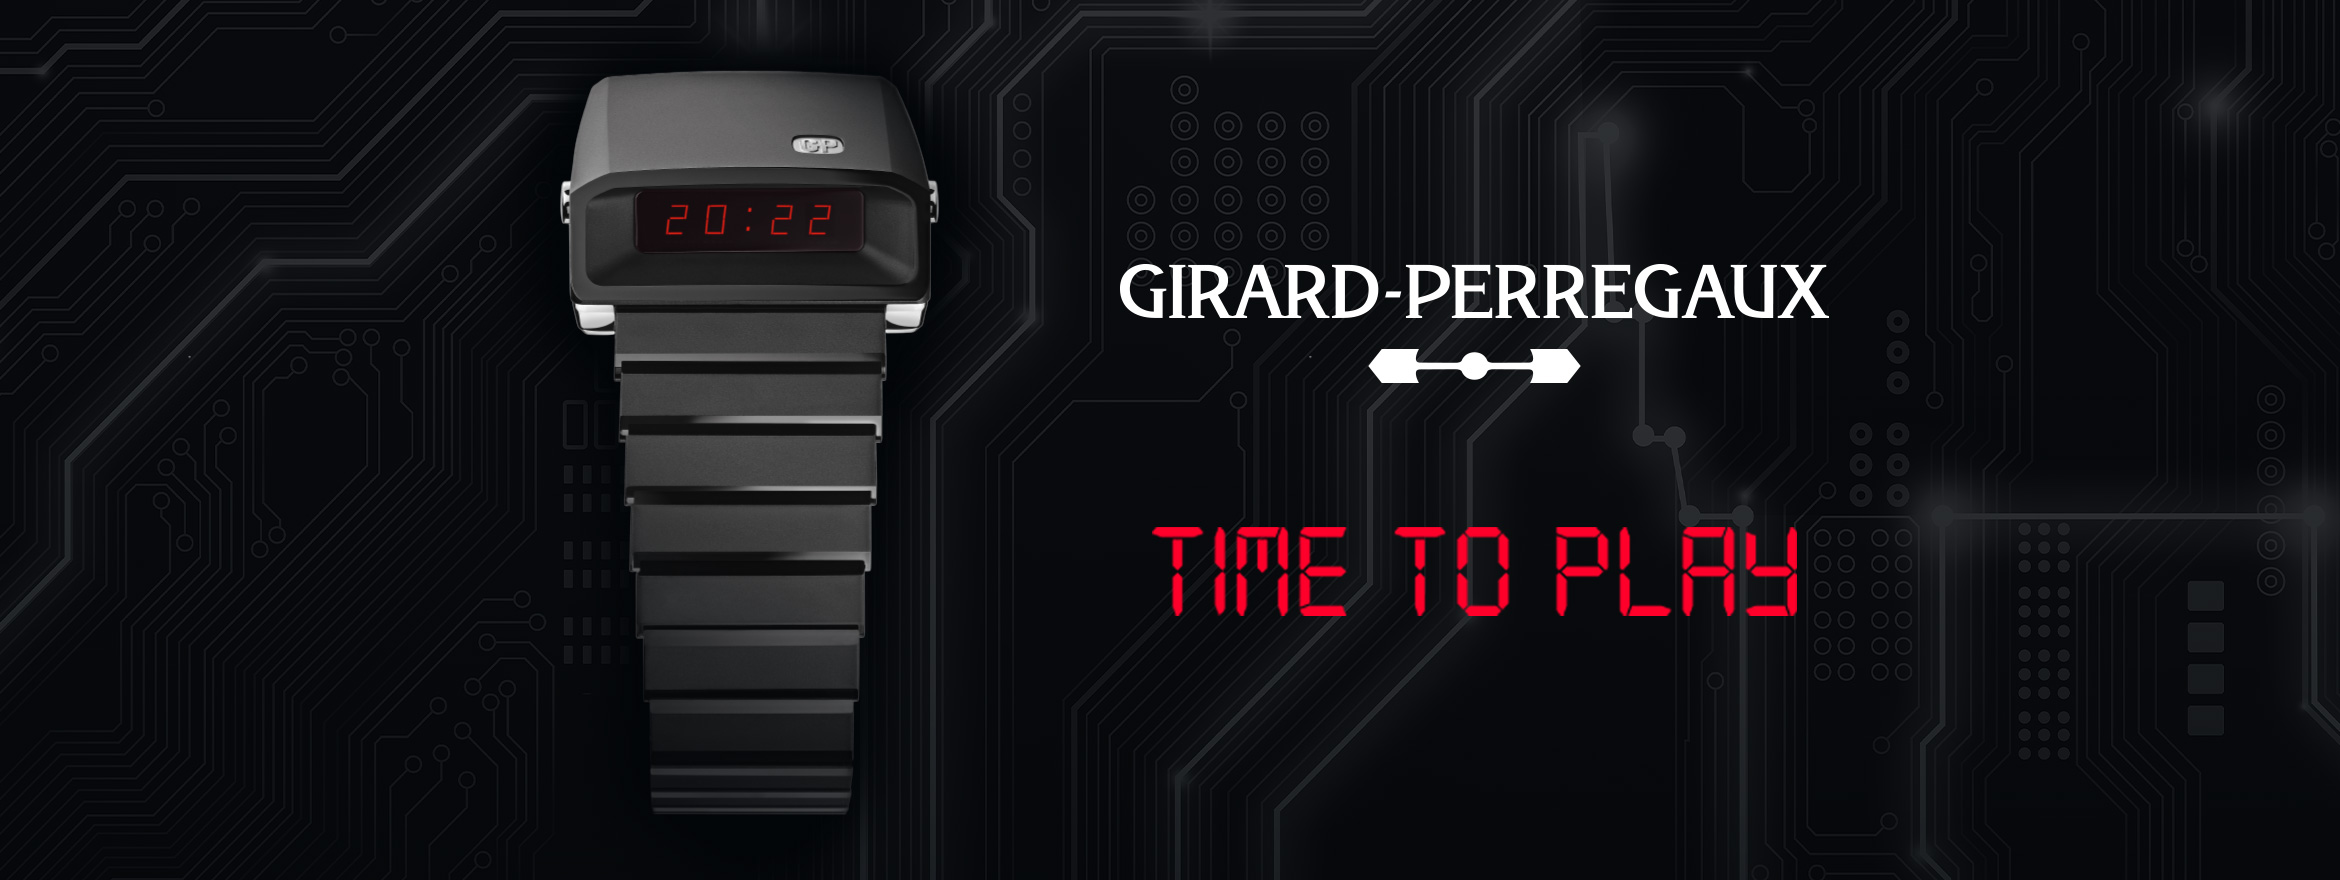 Discover the new Girard-Perregaux Casquette 2.0 at The Hour Glass